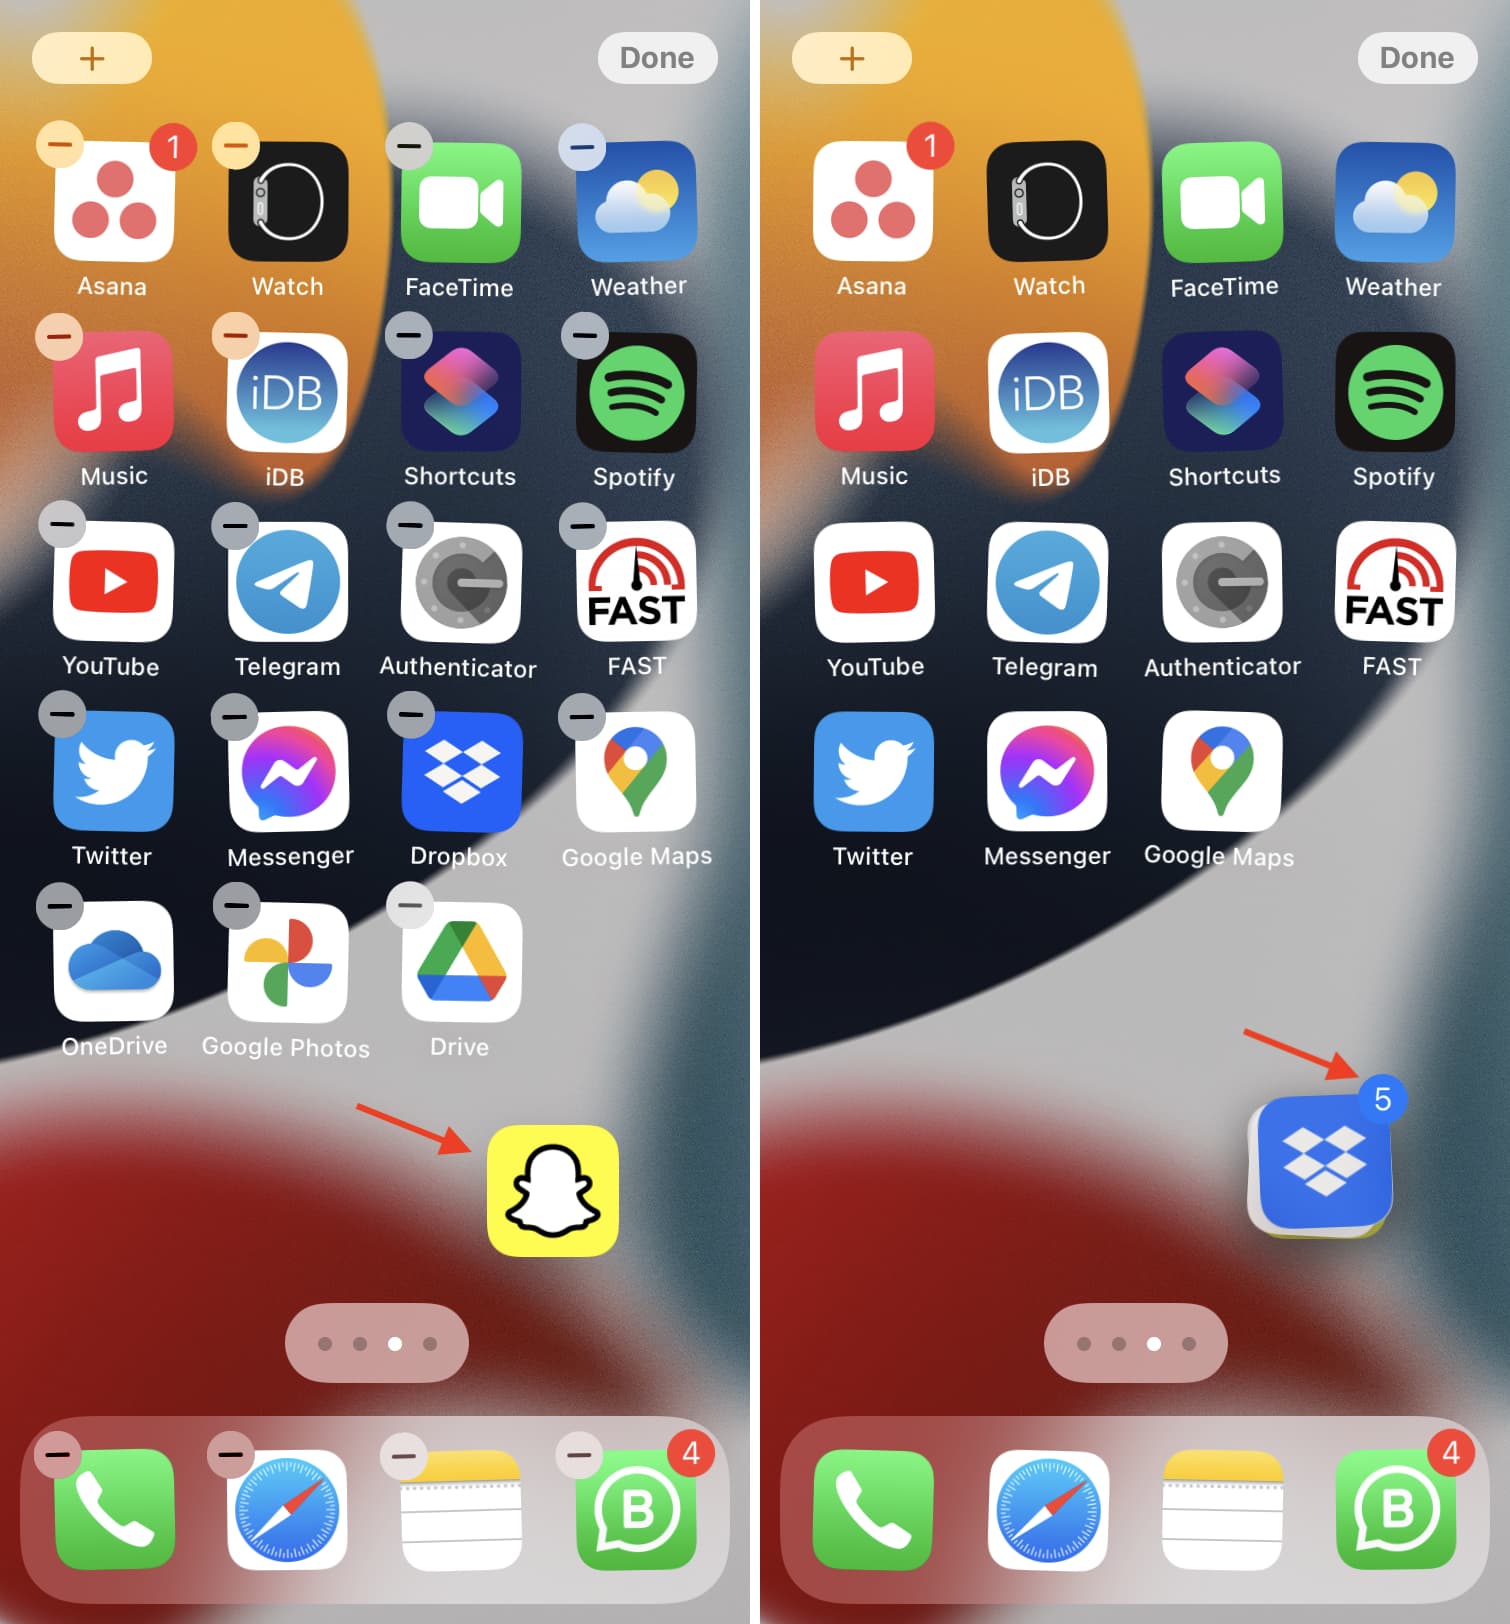 Press one app on iPhone Home Screen and tap more to bundle all